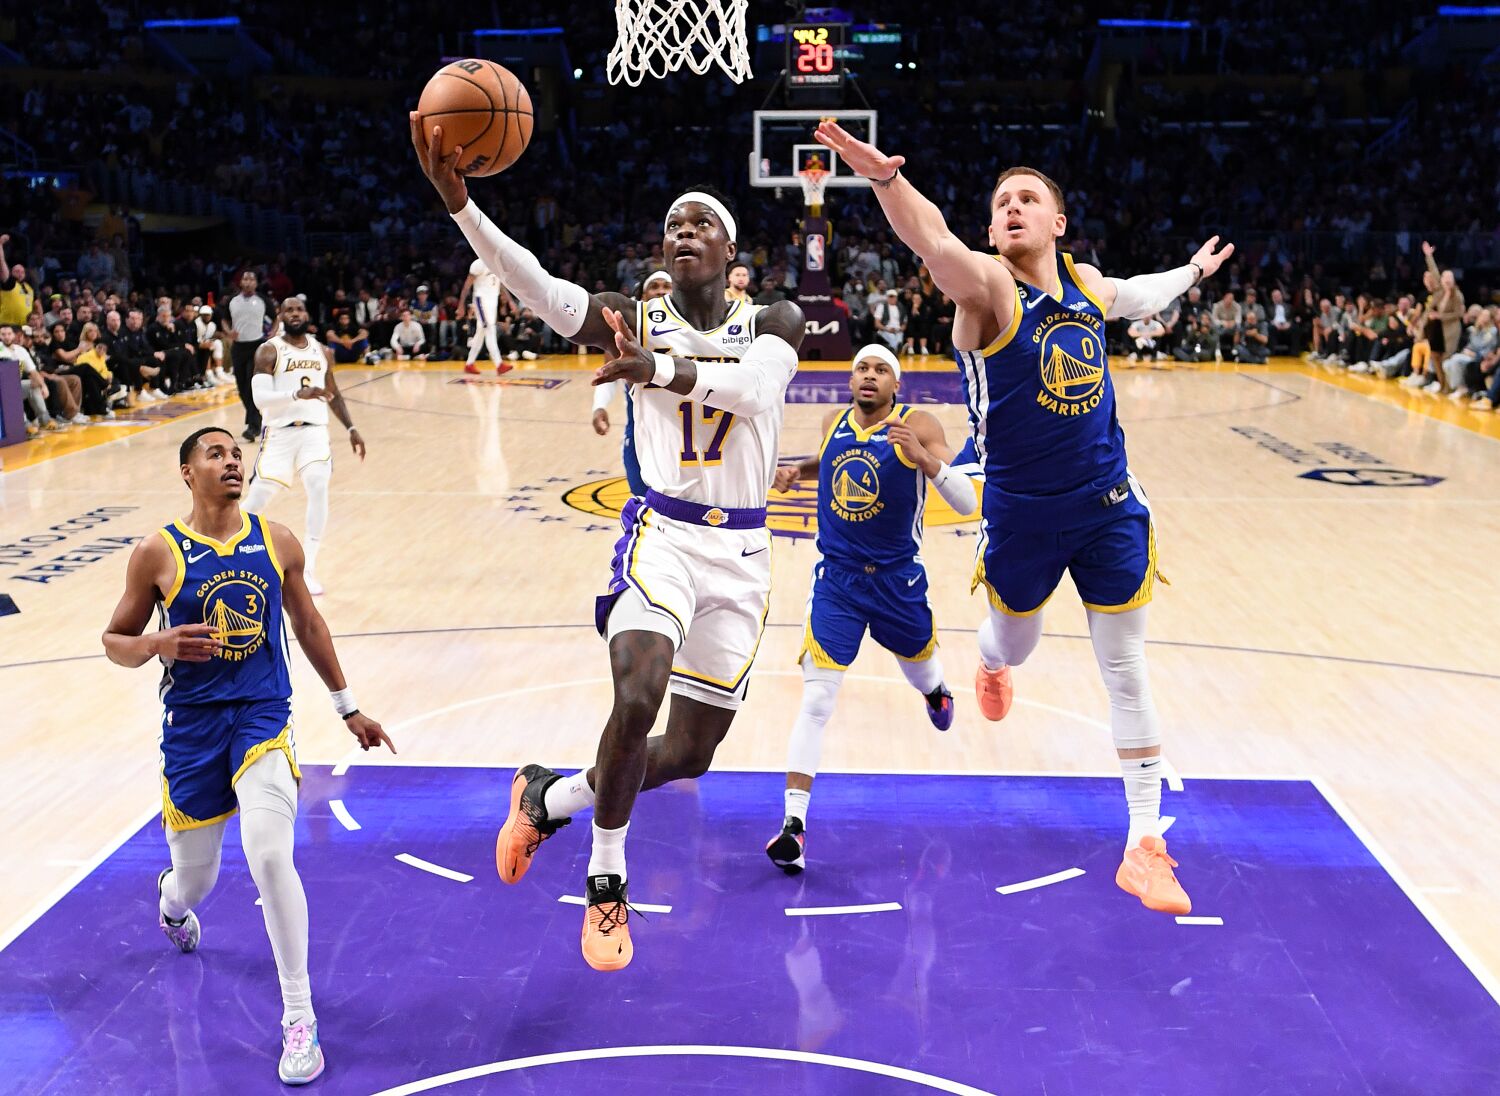 'They controlled it': How the Lakers dominated Warriors in Game 3 win